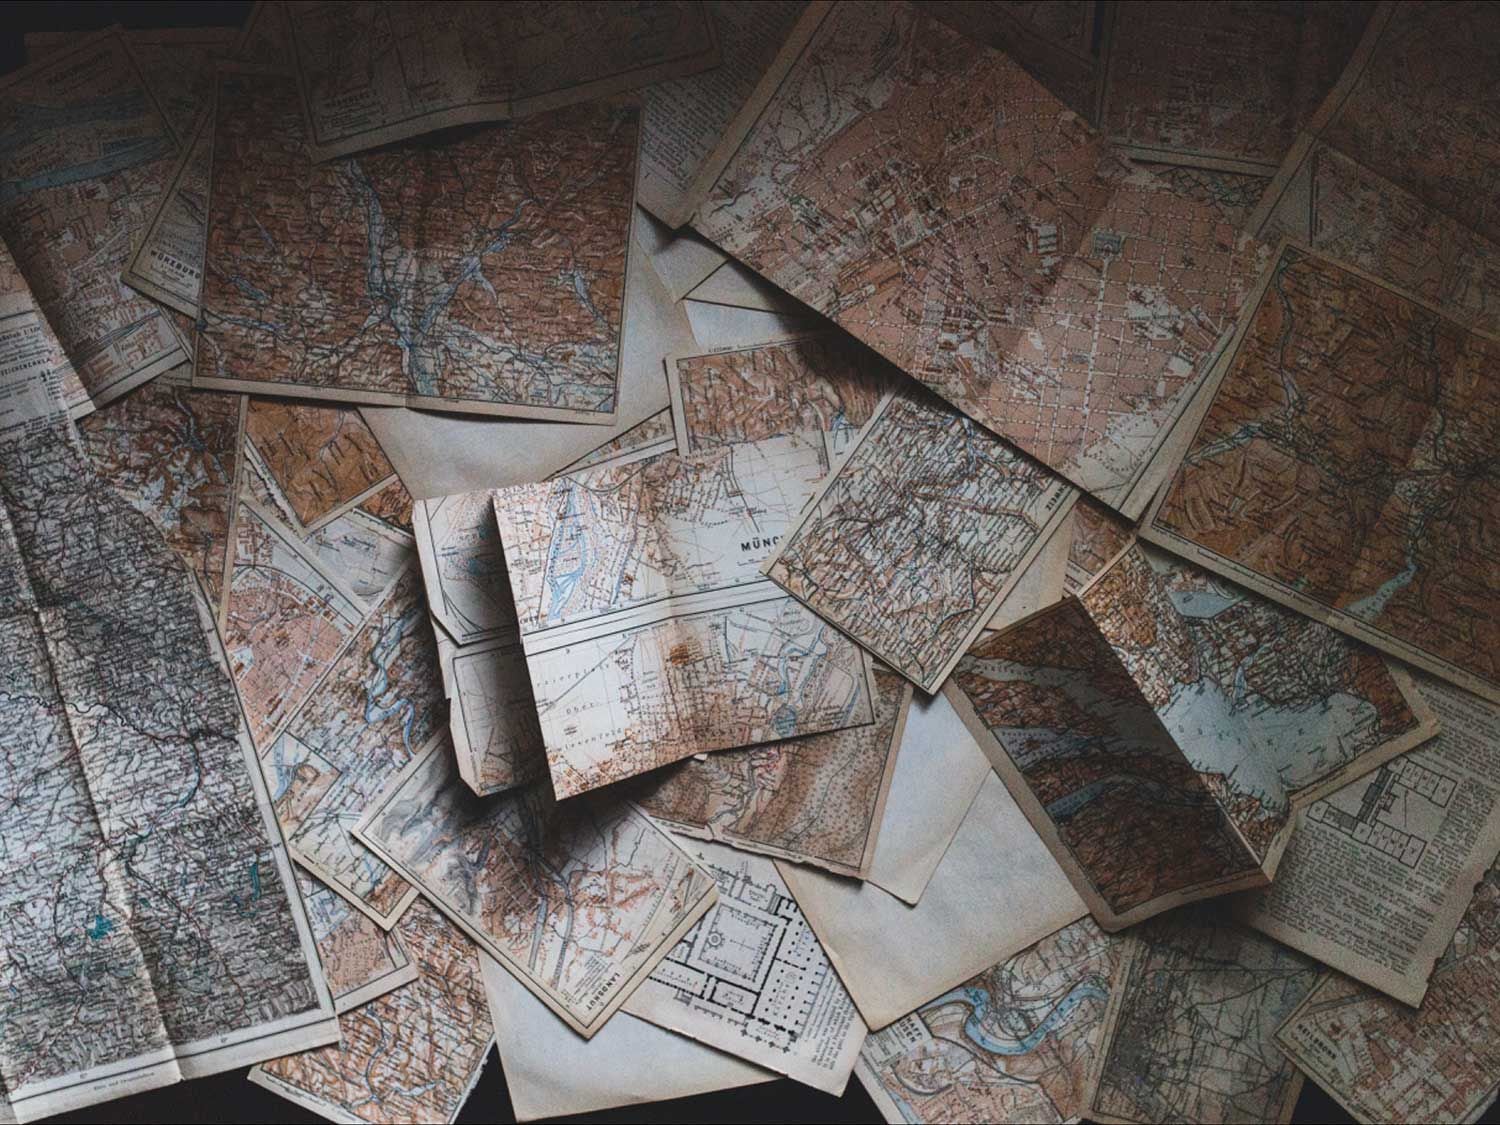 “Maps encourage boldness. They’re like cryptic love letters. They make anything seem possible.” ―<em>Mark Jenkins</em>